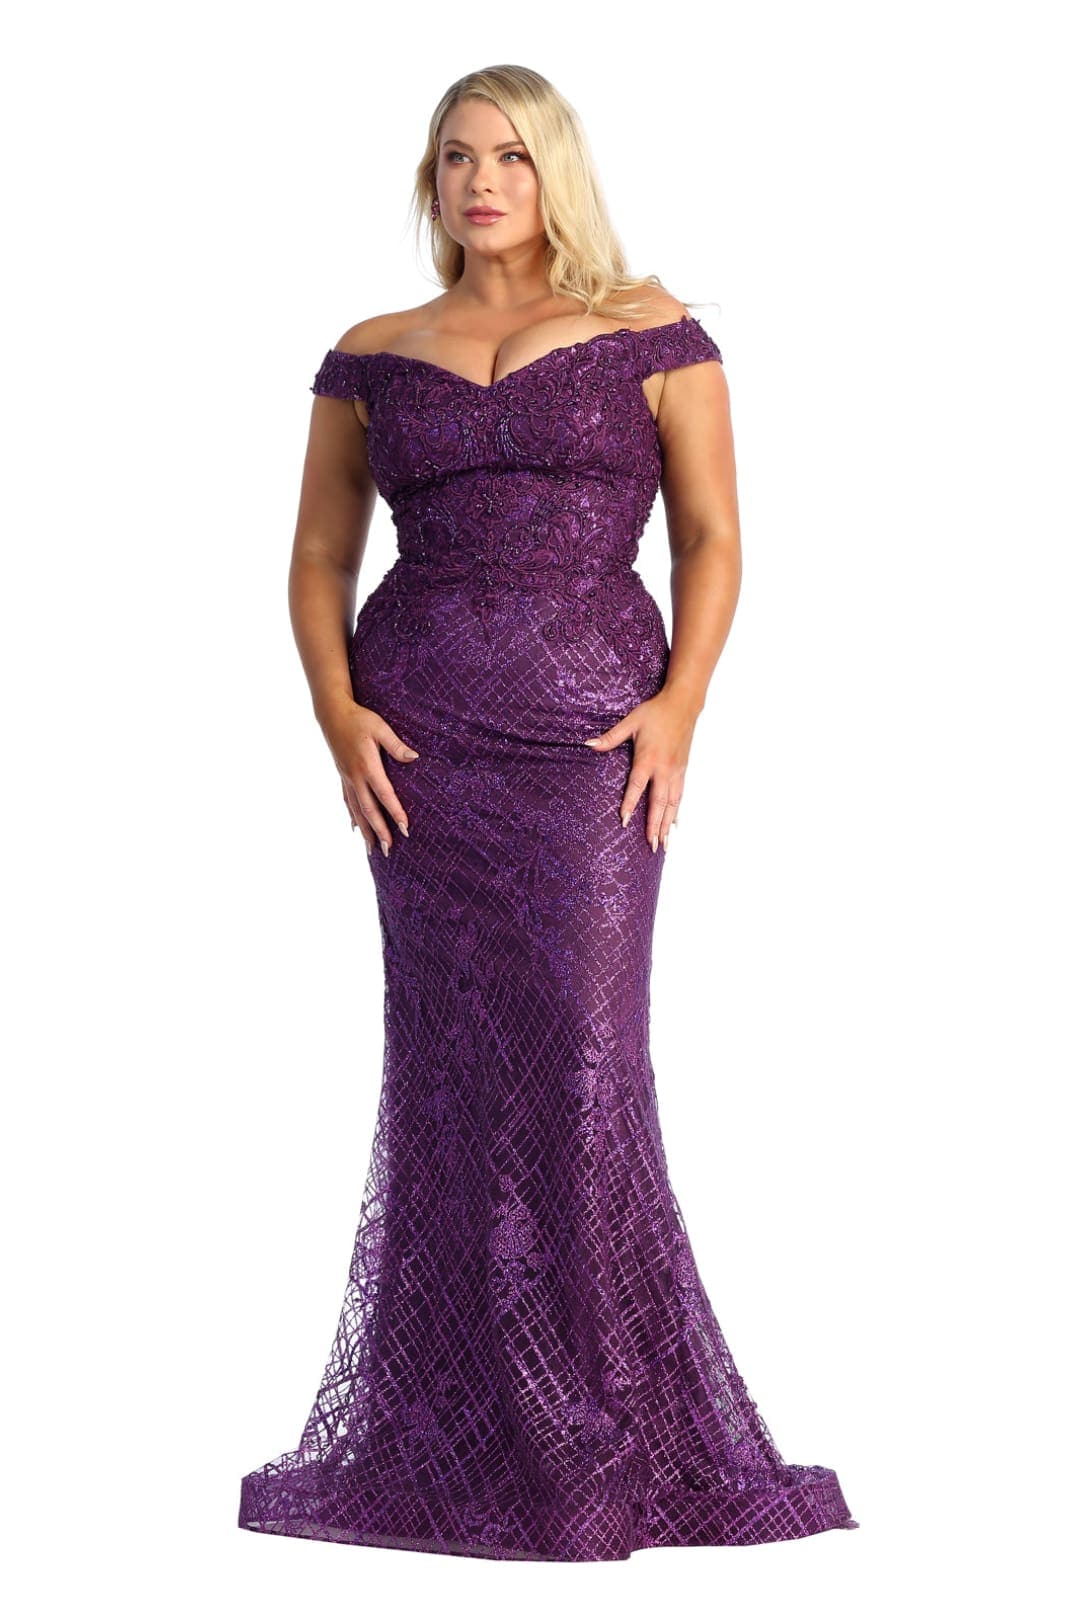 Special Occasion Dresses For Plus Size - EGGPLANT / 4 - Dress